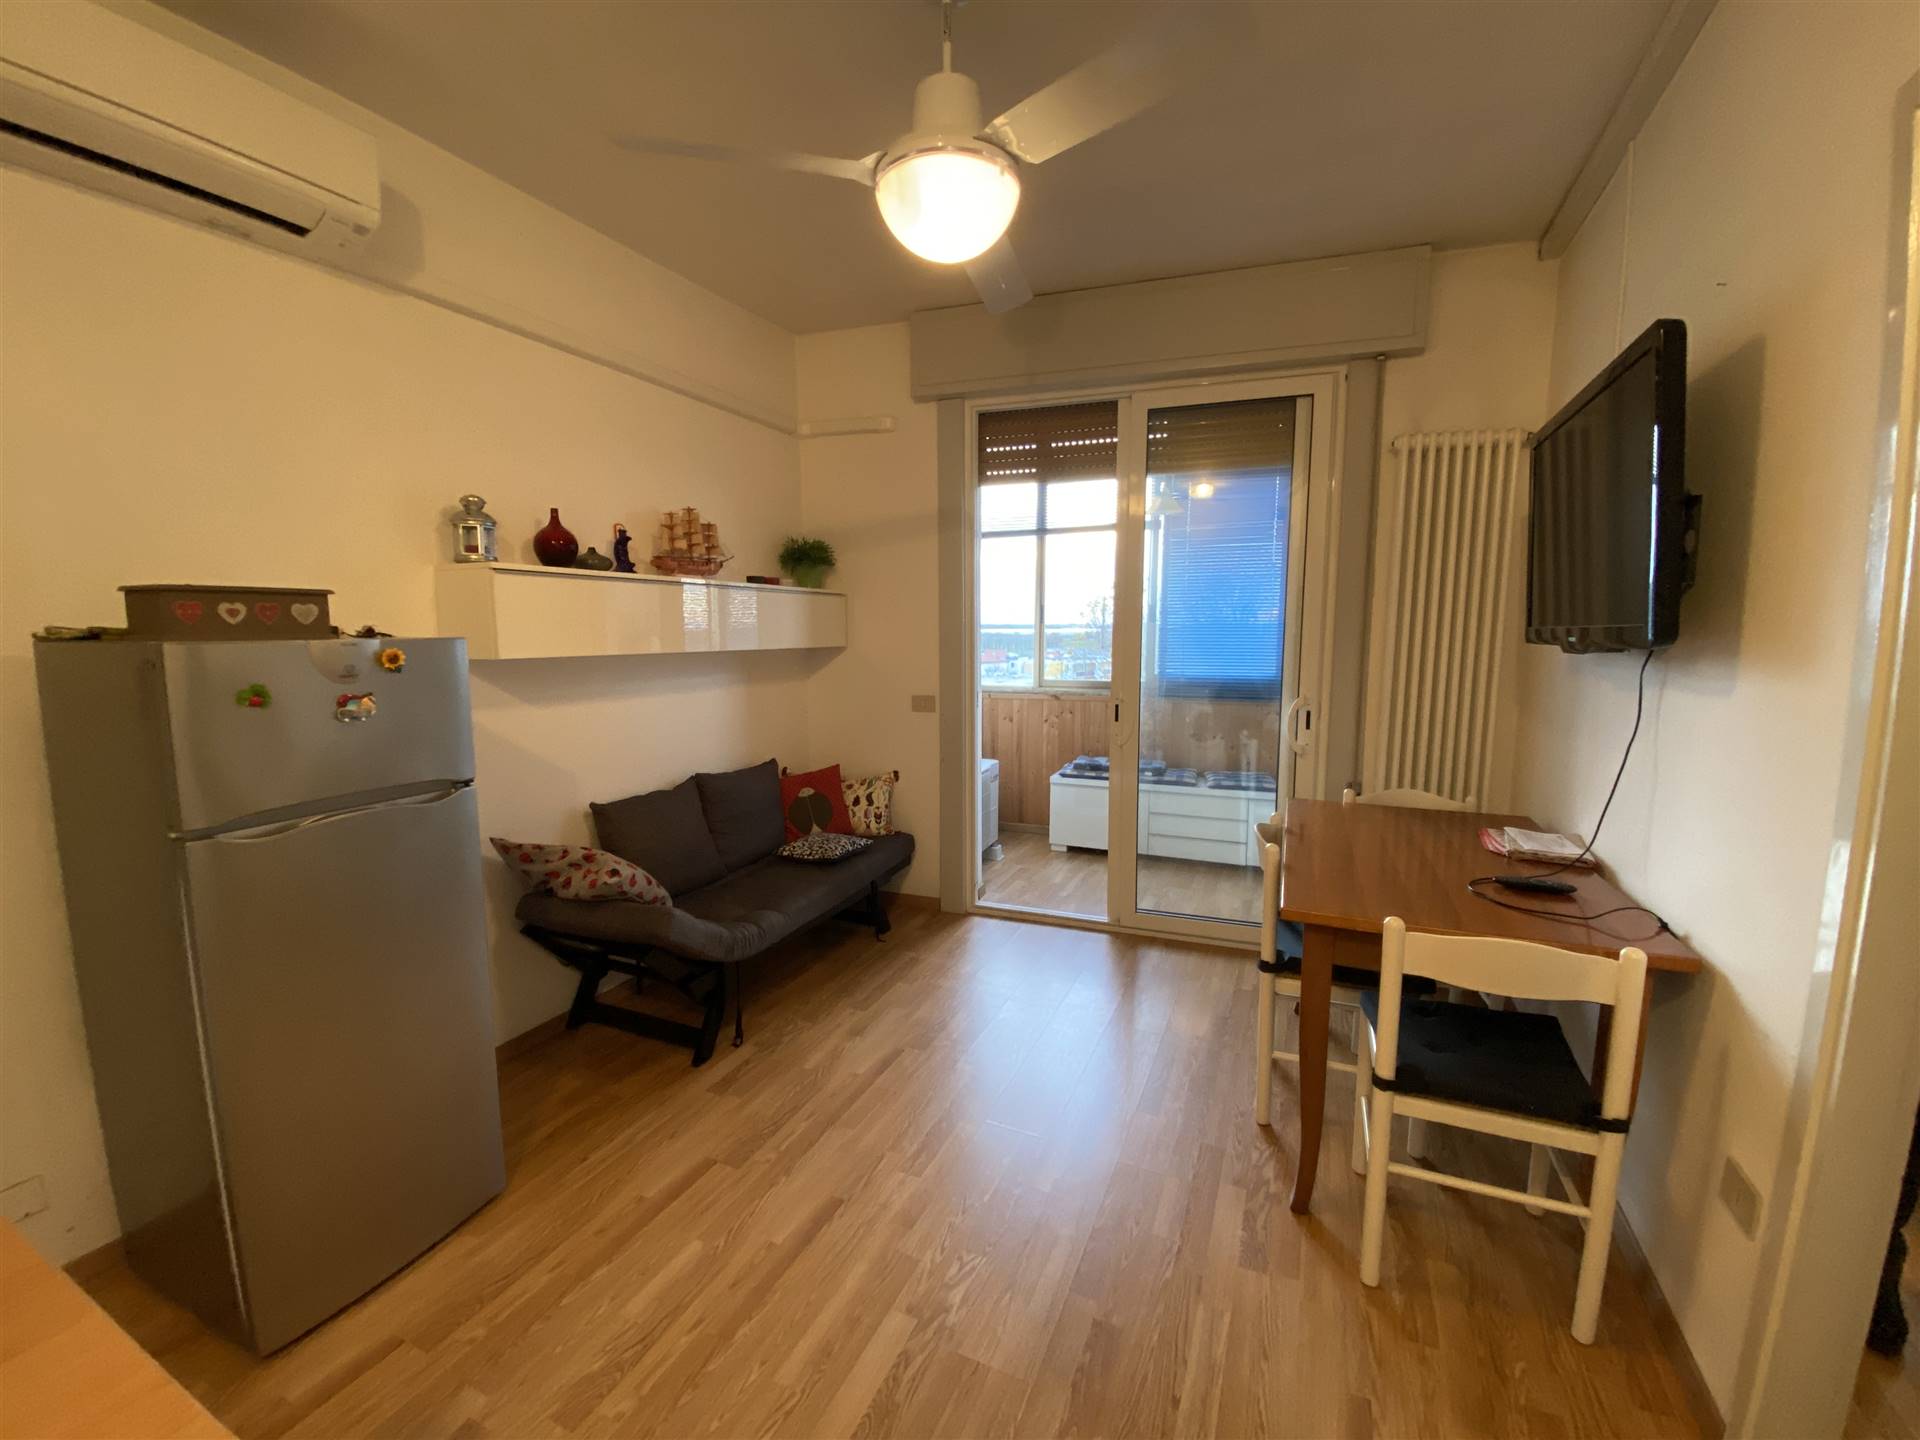 ISOLA VERDE, CHIOGGIA, Apartment for sale, Good condition, Heating Individual heating system, Energetic class: G, placed at 5° on 5, composed by: 2 